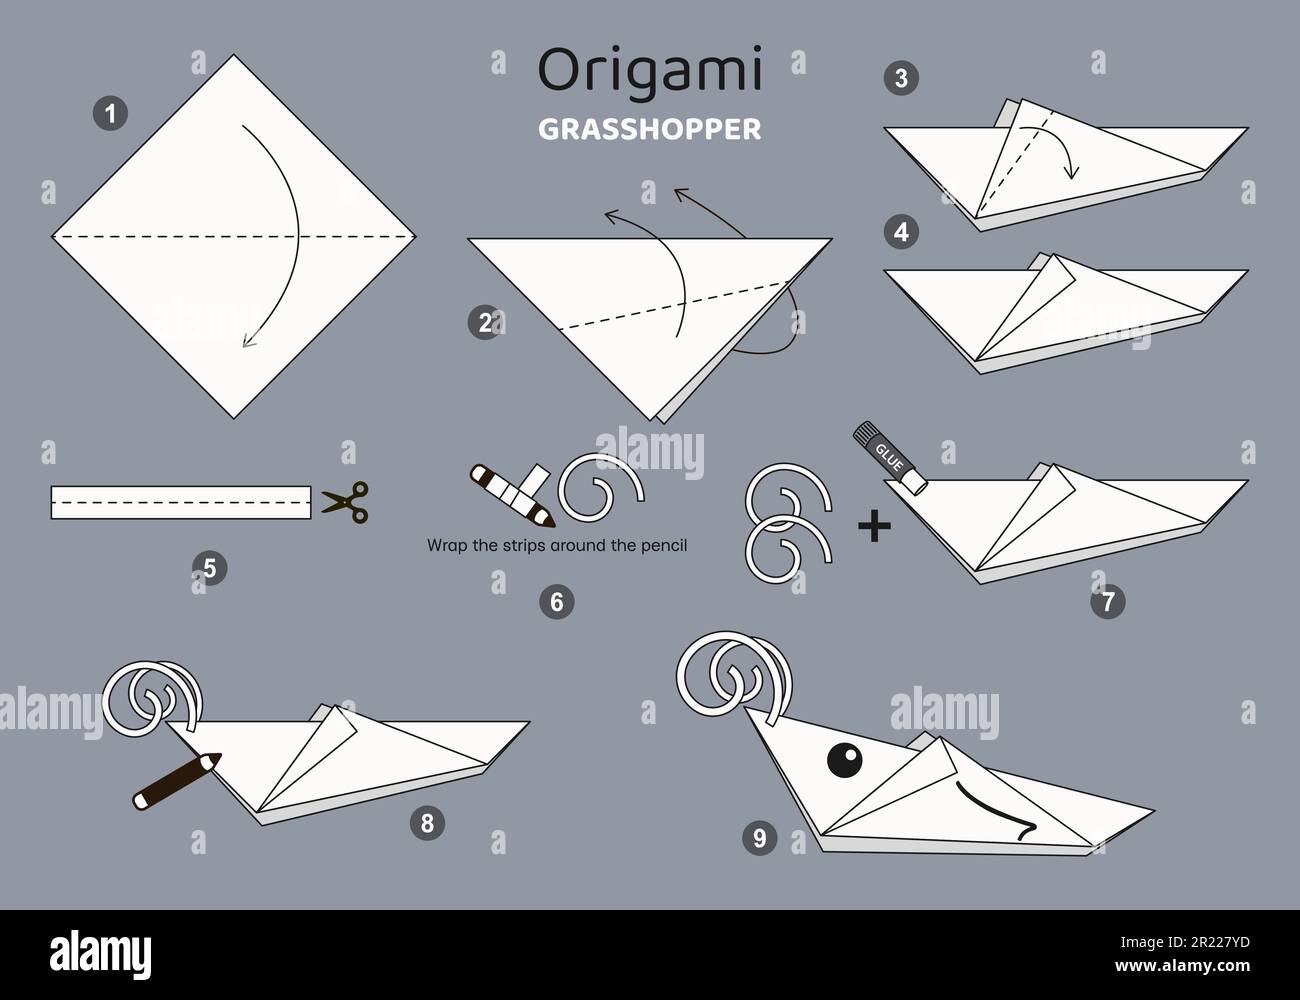 tag gamer 3d 6 - OrigamiAmi